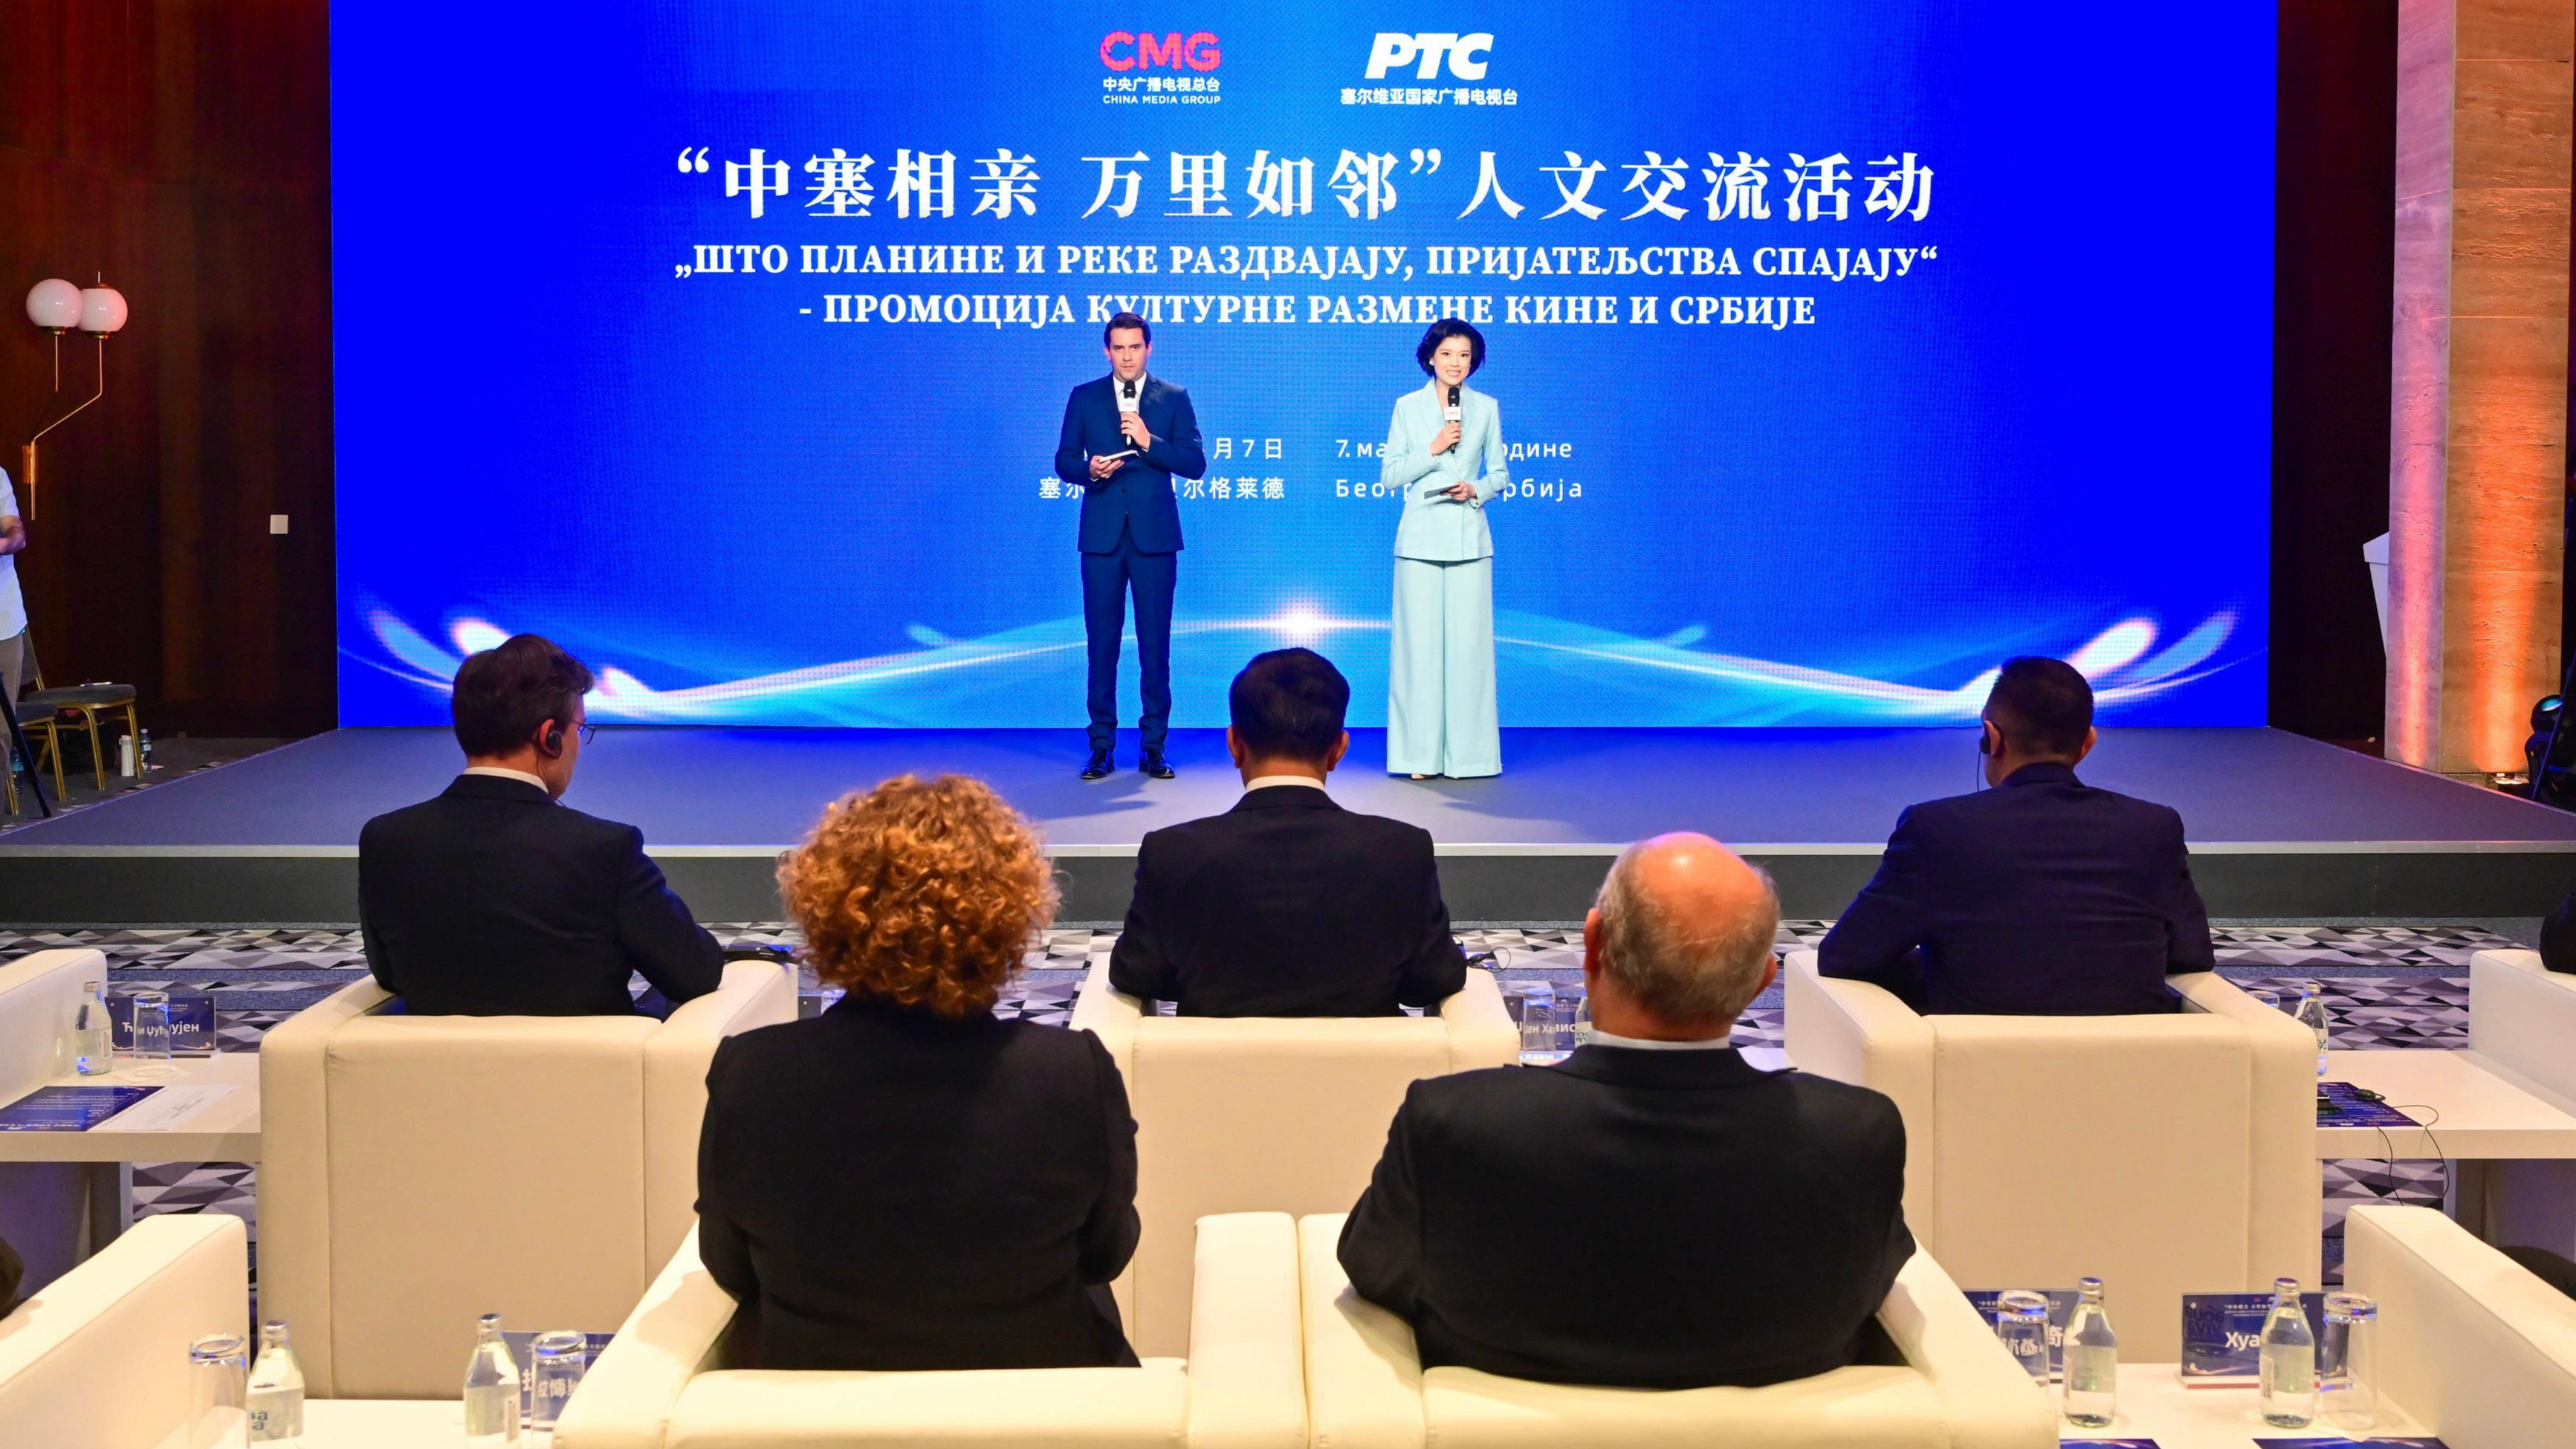 China Media Group and Radio Television of Serbia host the 